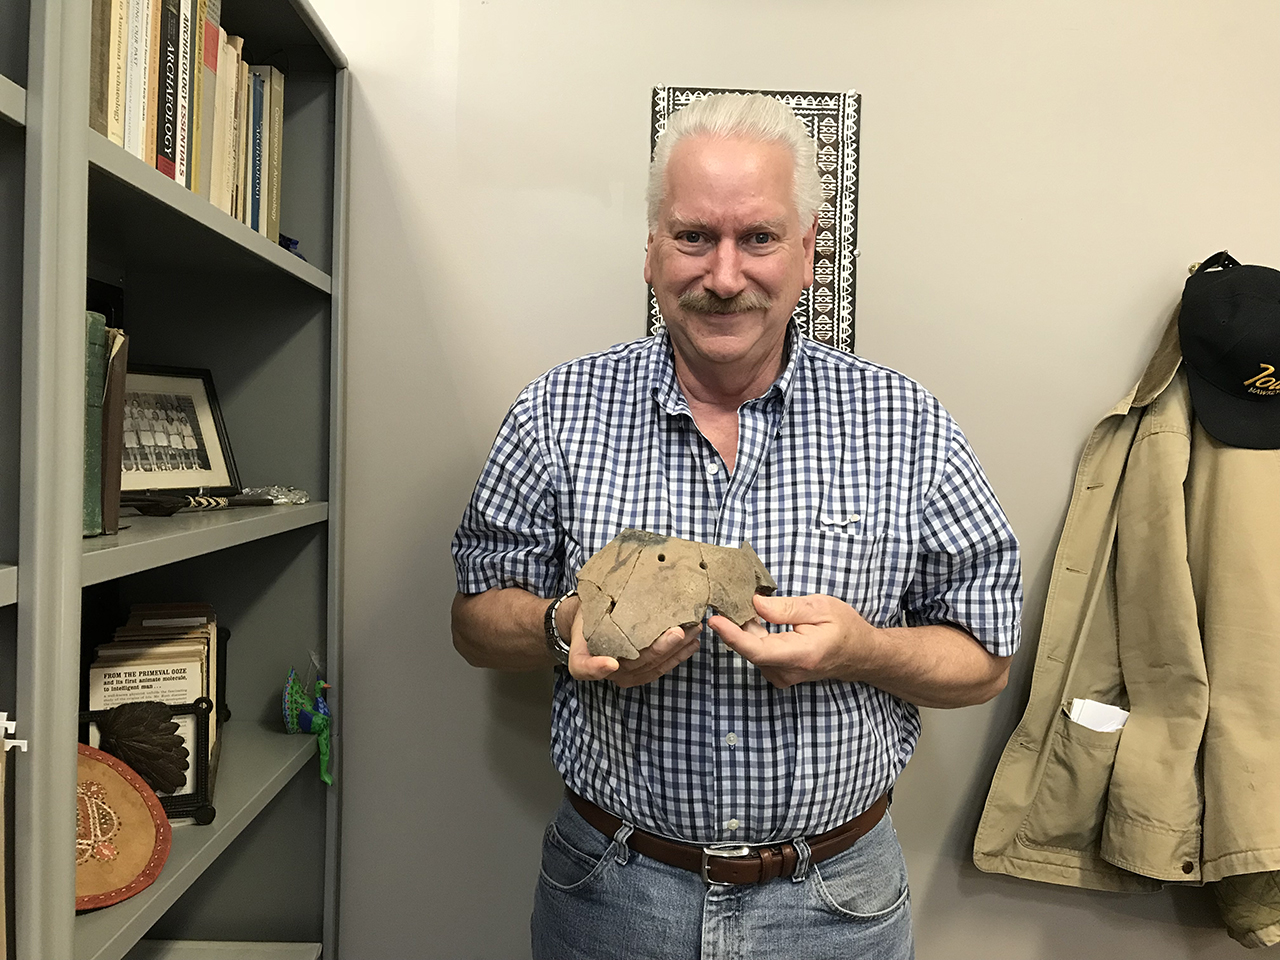 Joe Tiffany holding bison seed jar from Phipps sit